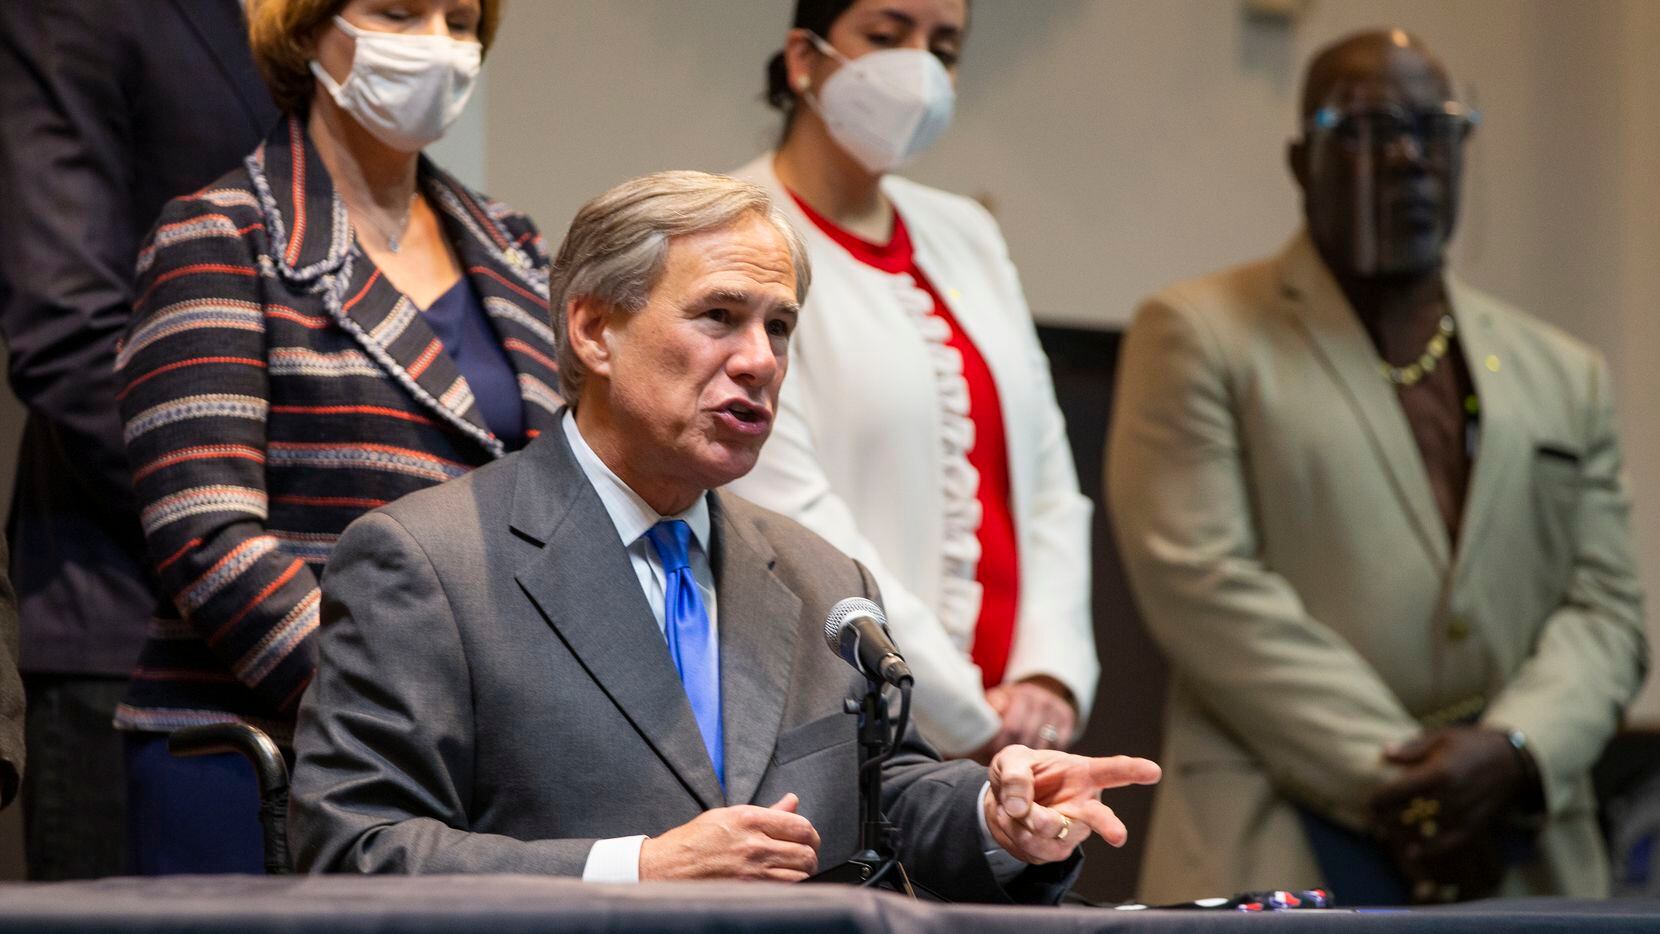 Governor Greg Abbott speaks at a press conference to announce legislative proposals related to public safety at the Dallas Police Association in Dallas Sept. Thursday, 24, 2020 . (Juan Figueroa/ The Dallas Morning News)